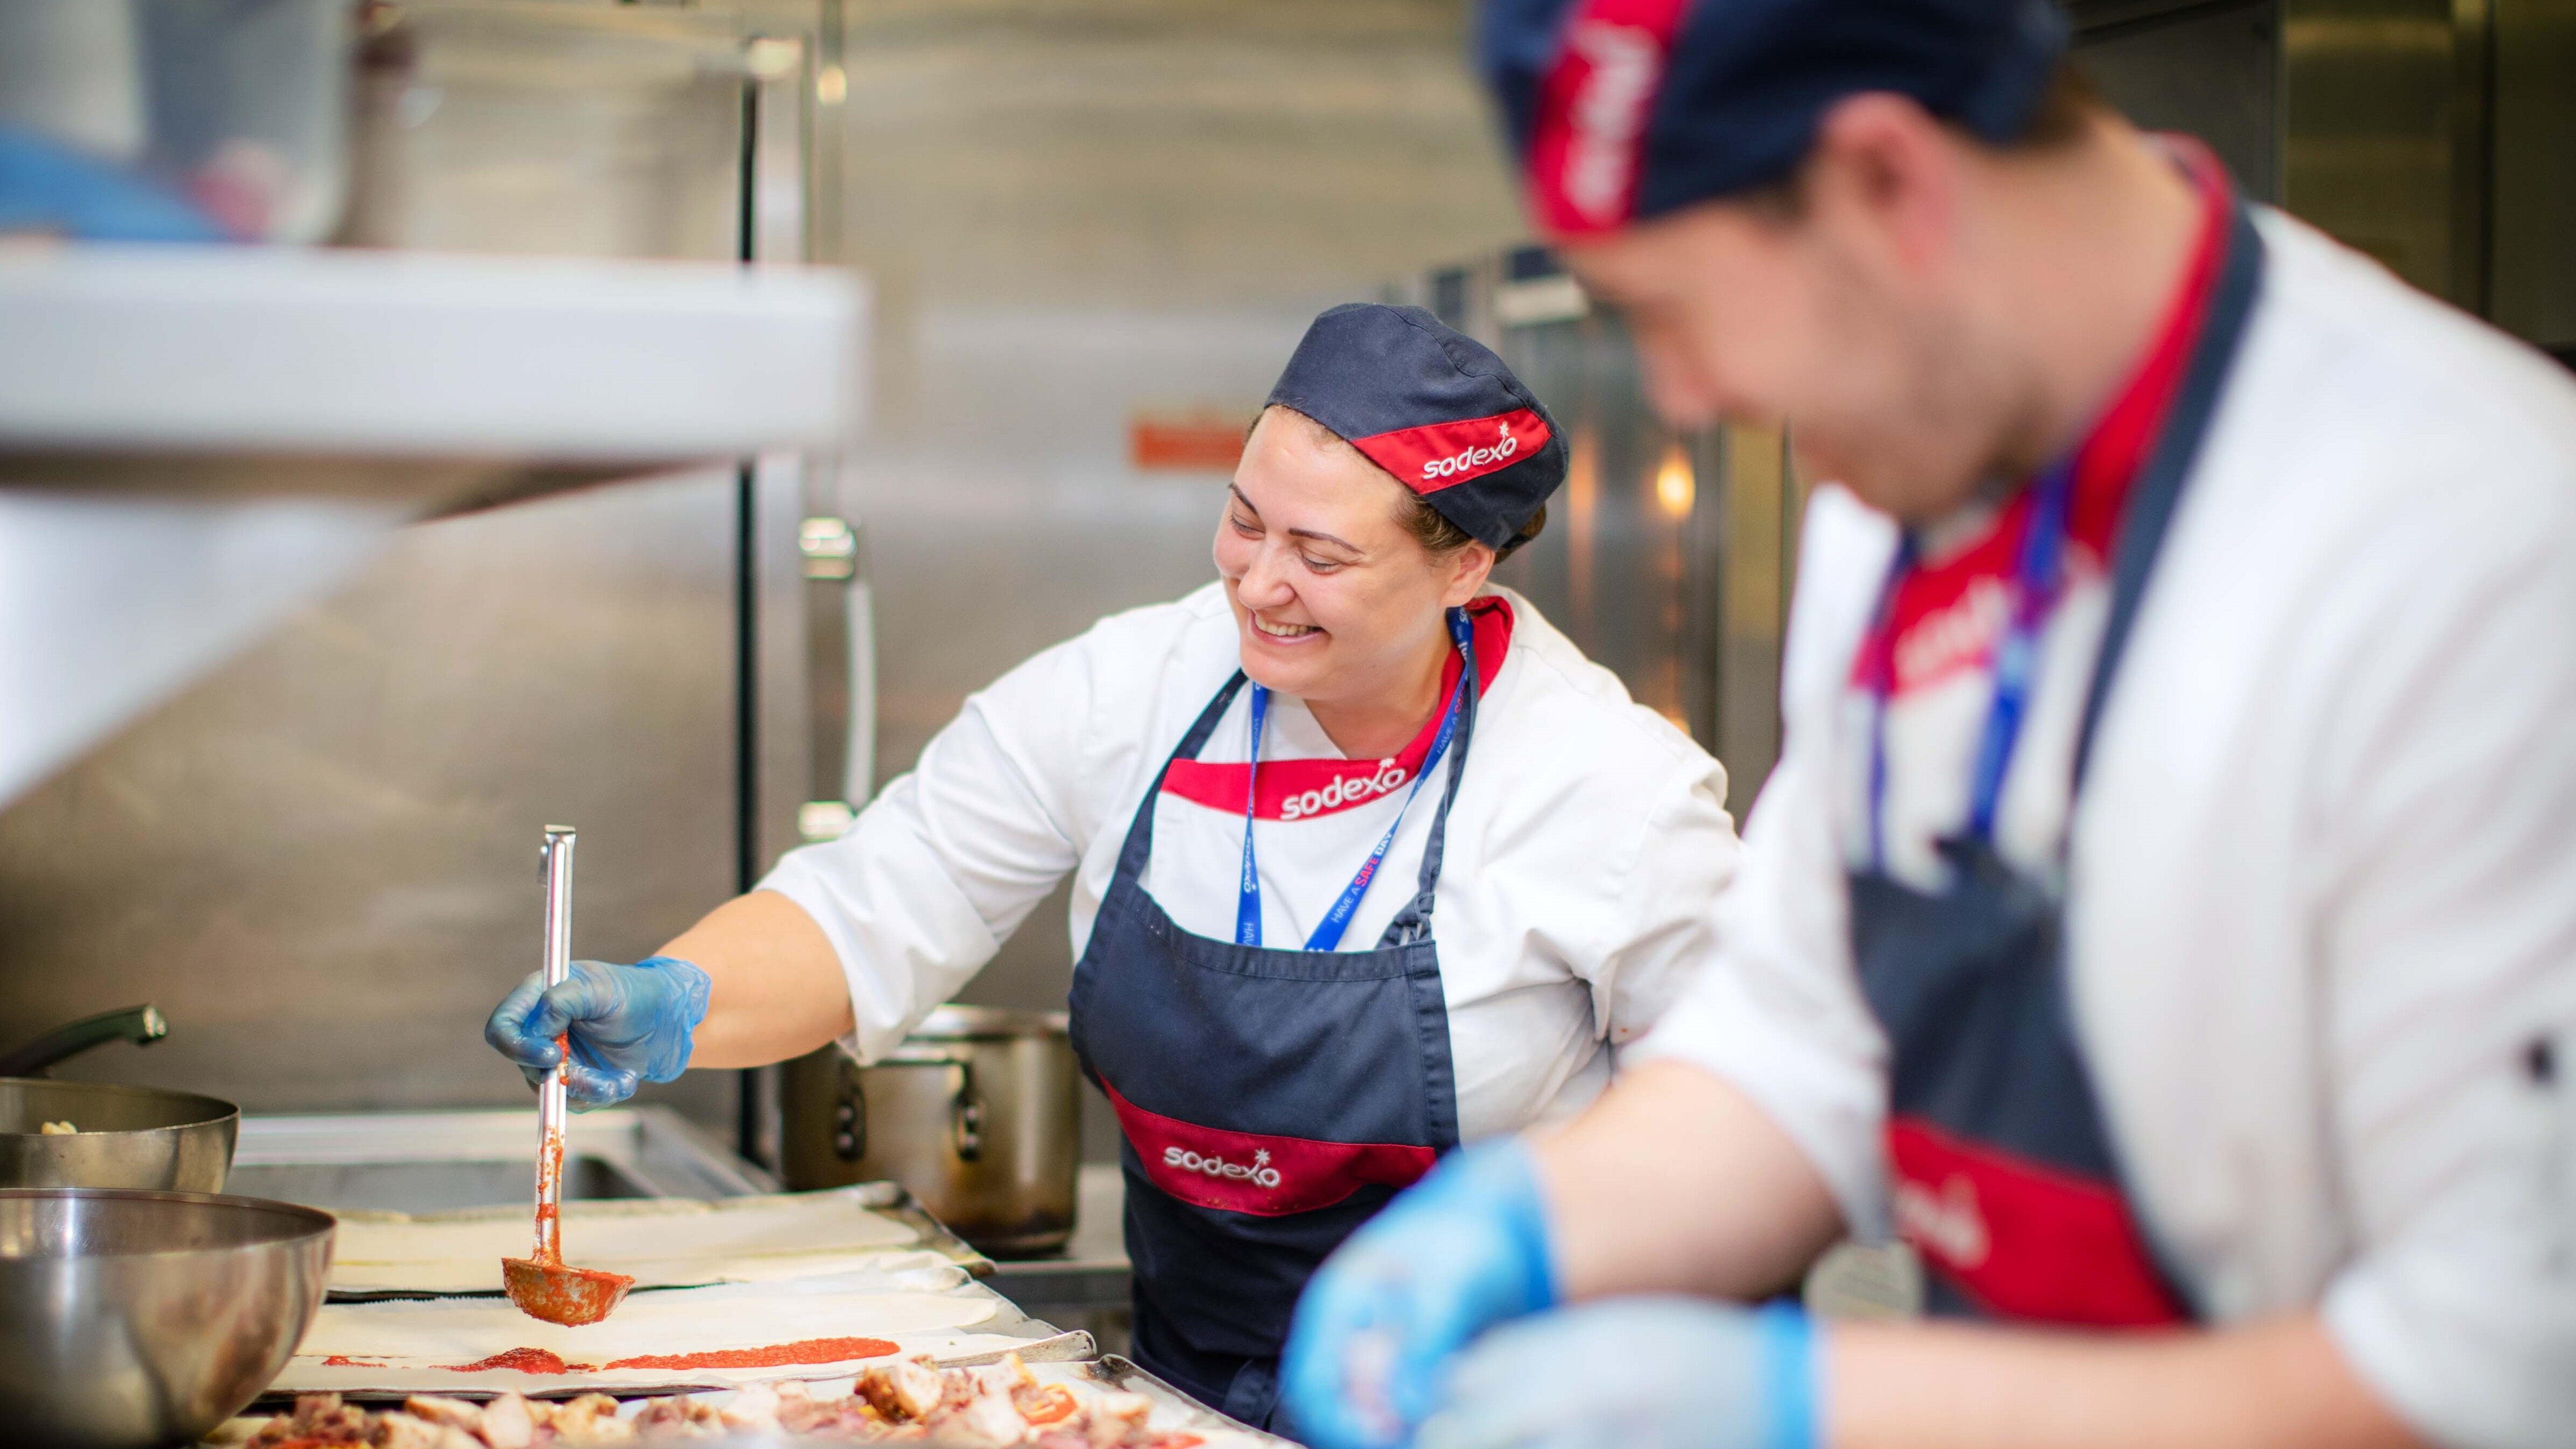 Sodexo remains 'optimistic for the future' amid strong H1 results 